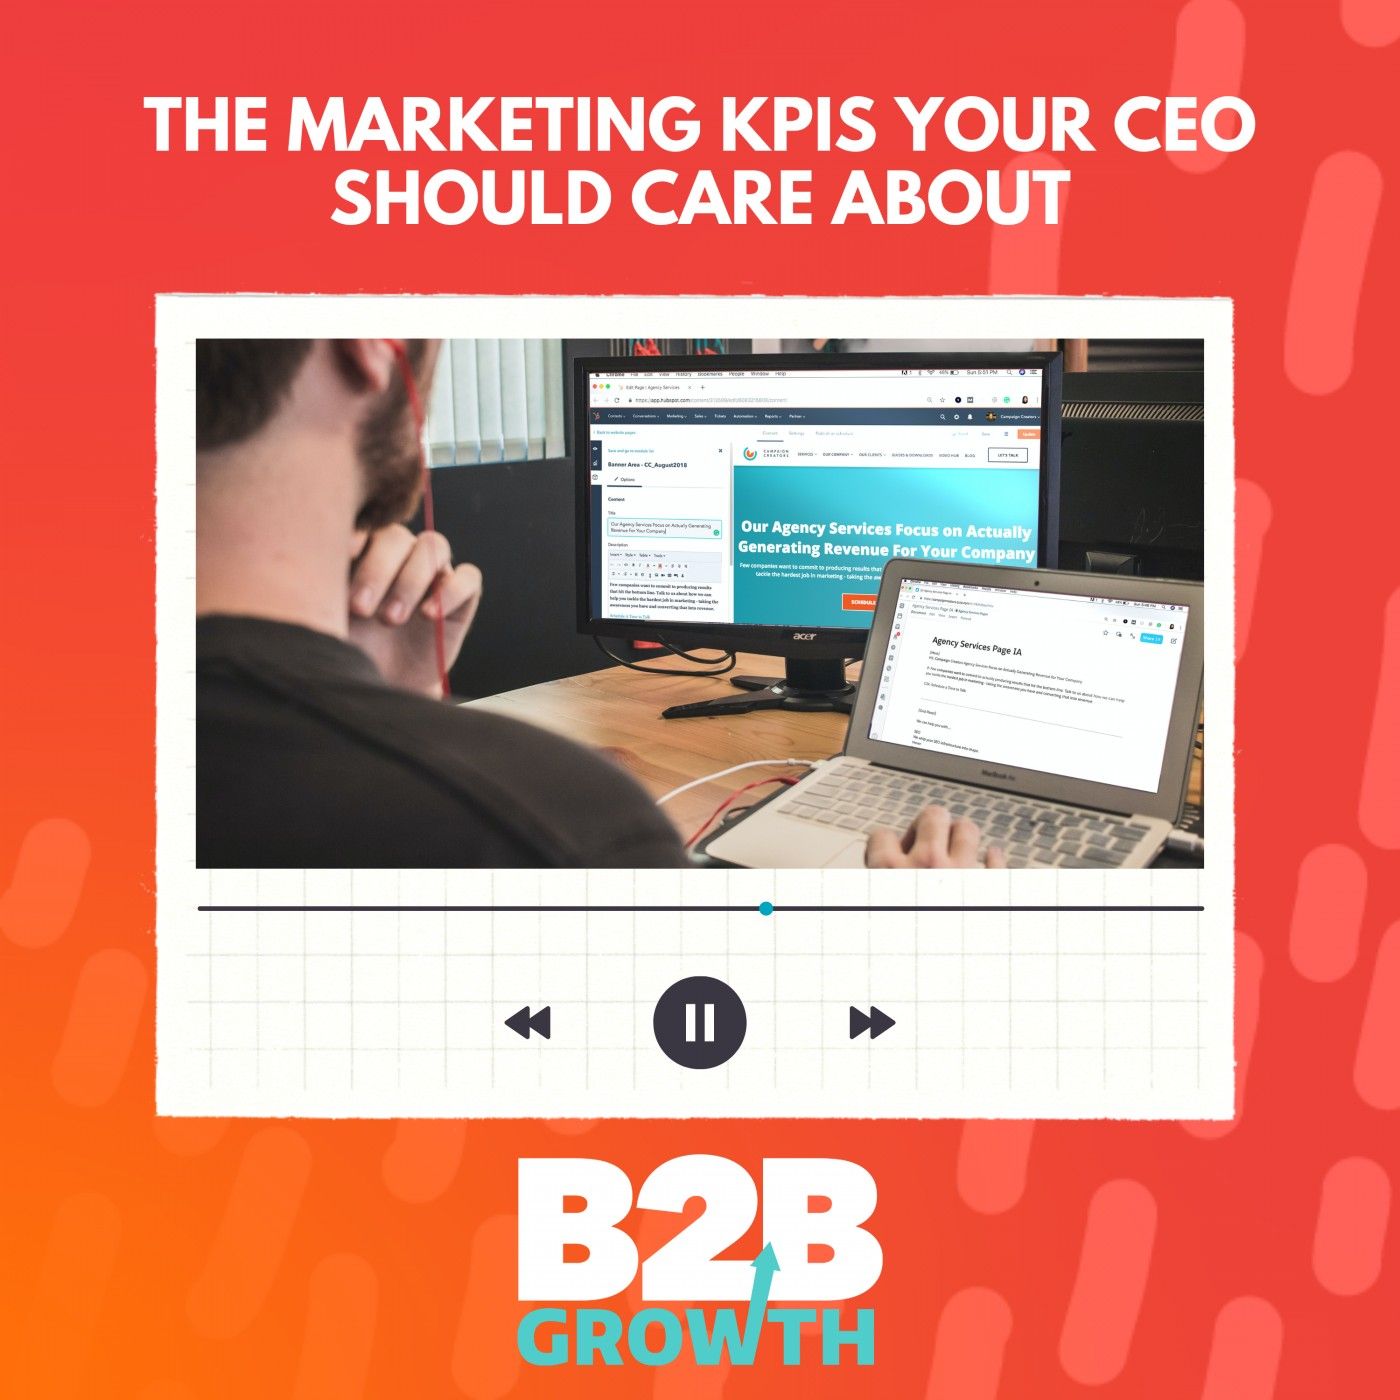 The Marketing KPIs Your CEO Should Care About | Original Research